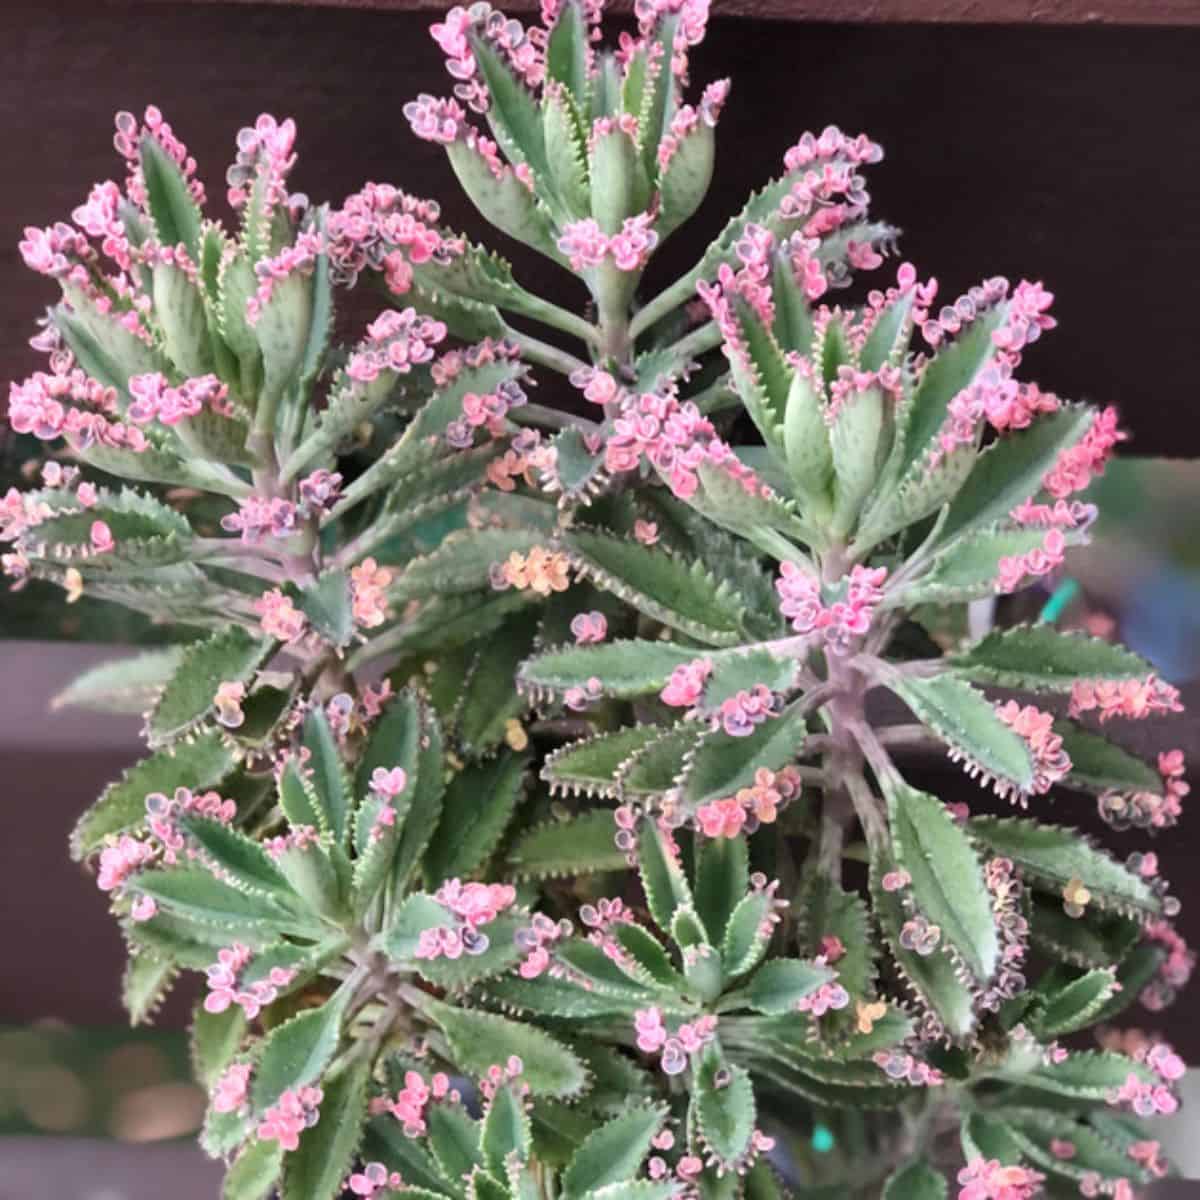 Kalanchoe sp. - Pink Mother of Thousands or Pink Butterflies